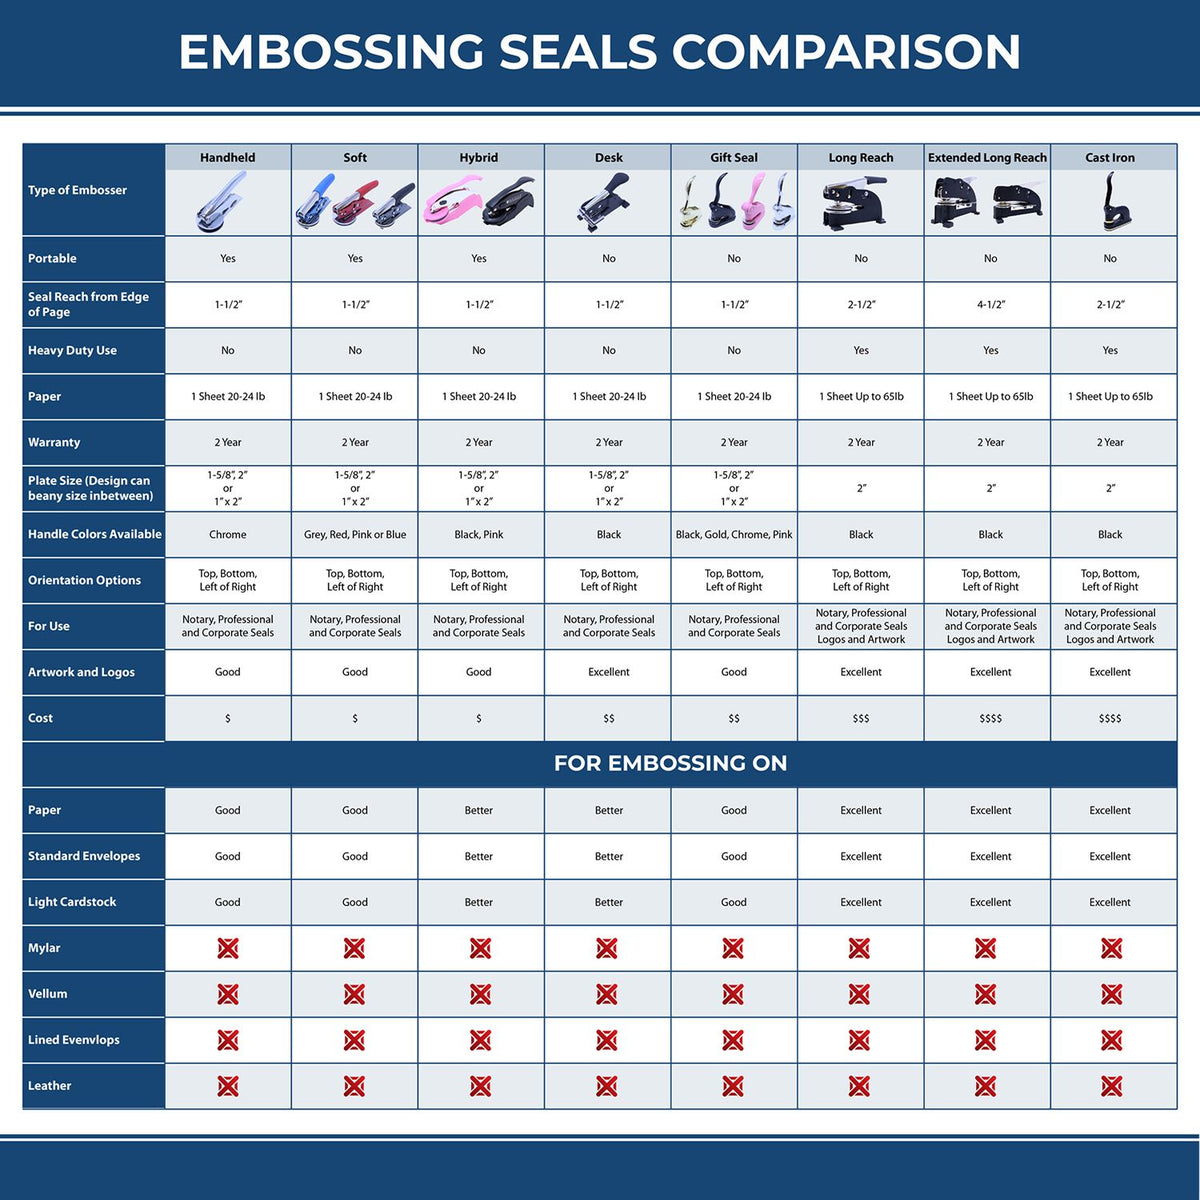 A comparison chart for the different types of mount models available for the Long Reach Kansas Land Surveyor Seal.